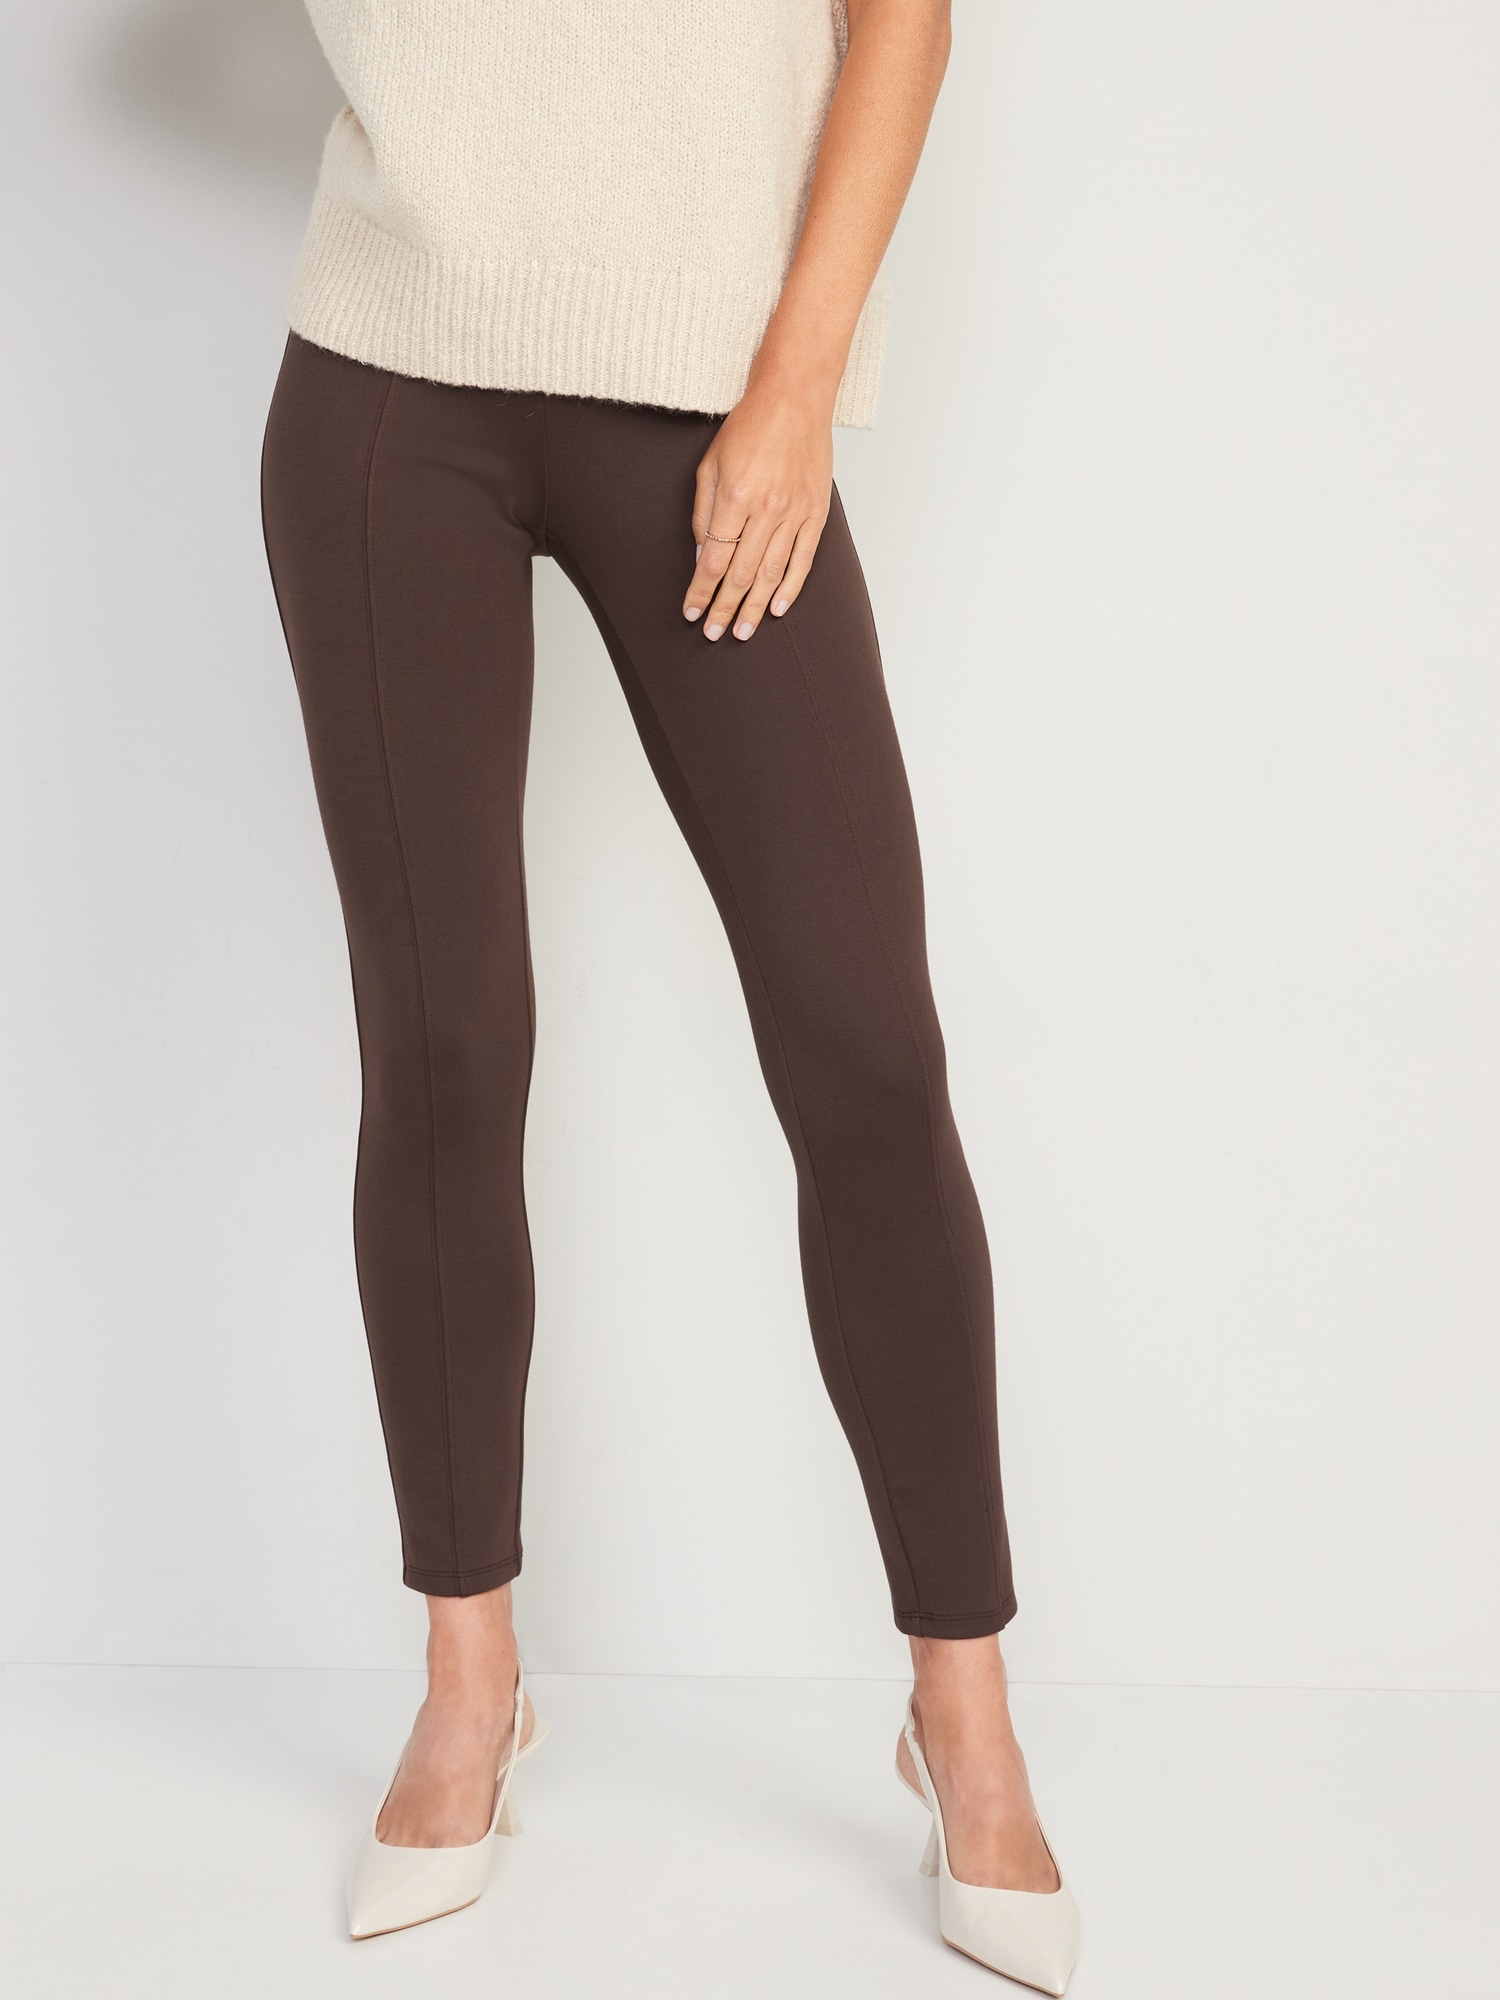 Old Navy Extra High-Waisted Stevie Skinny Ankle Pants for Women brown. 1